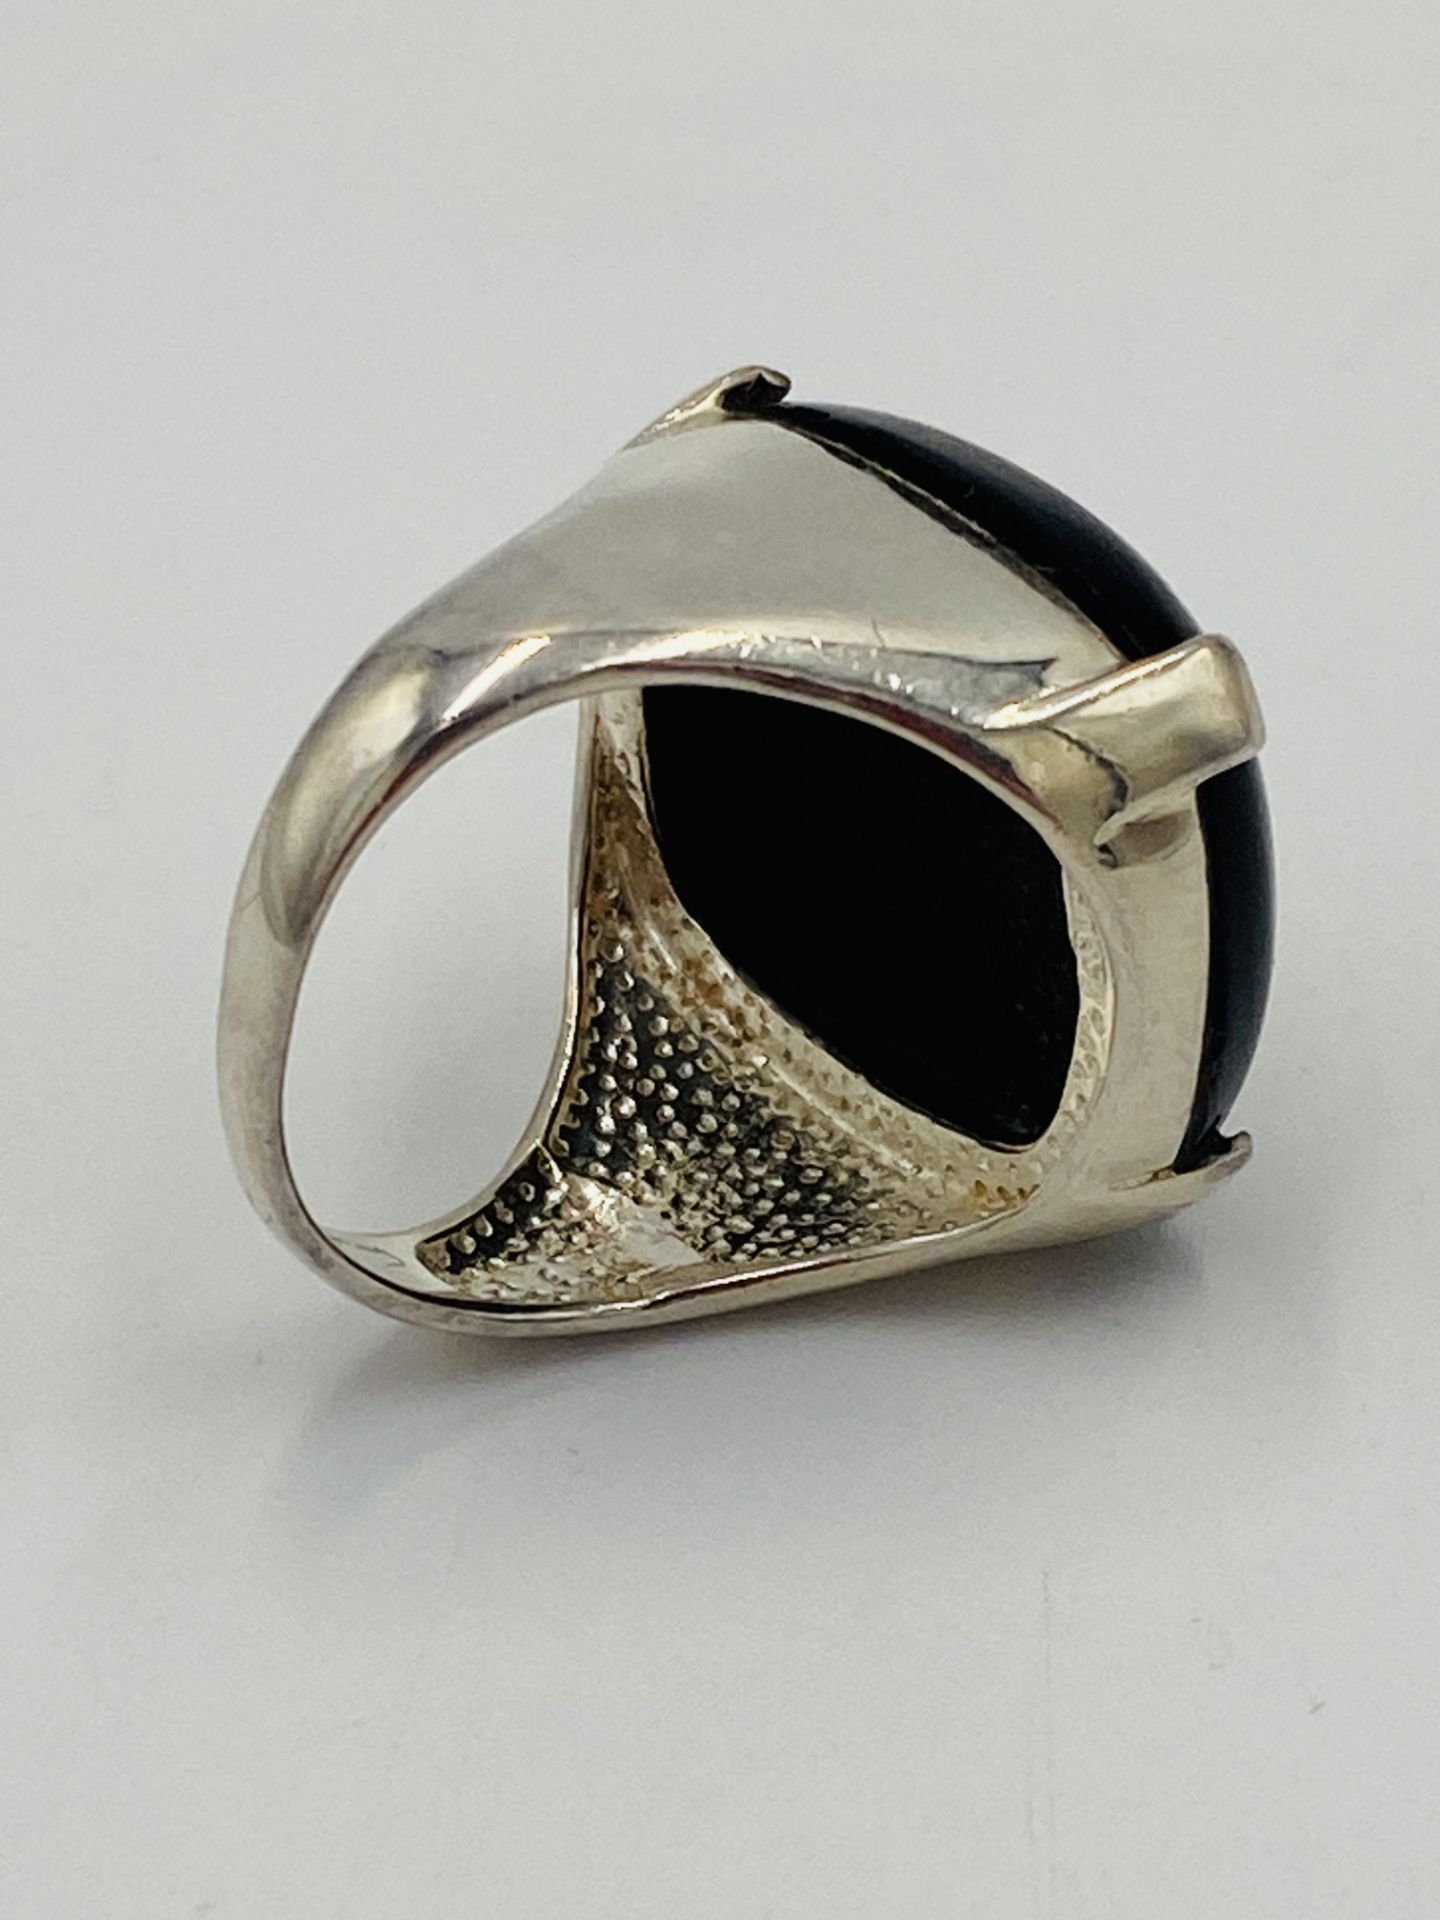 Silver ring set with an onyx stone - Image 5 of 5